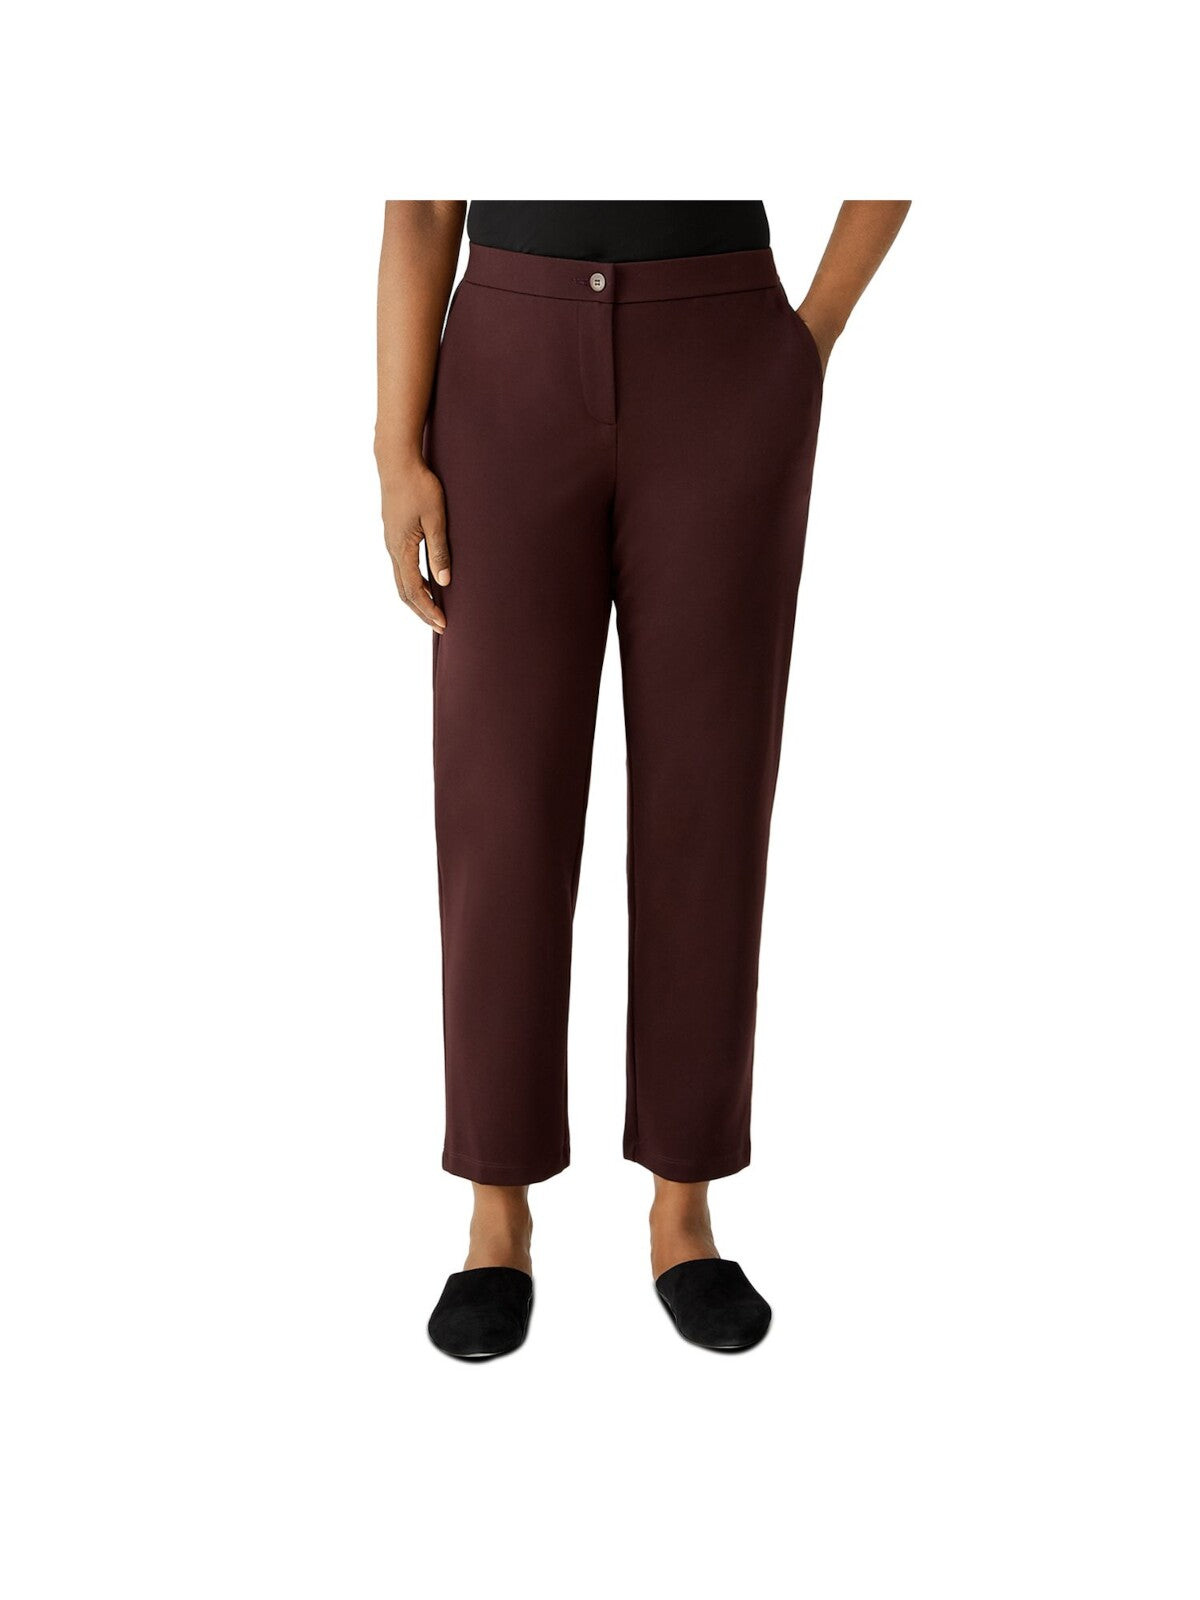 EILEEN FISHER Womens Burgundy Evening Cropped Pants S